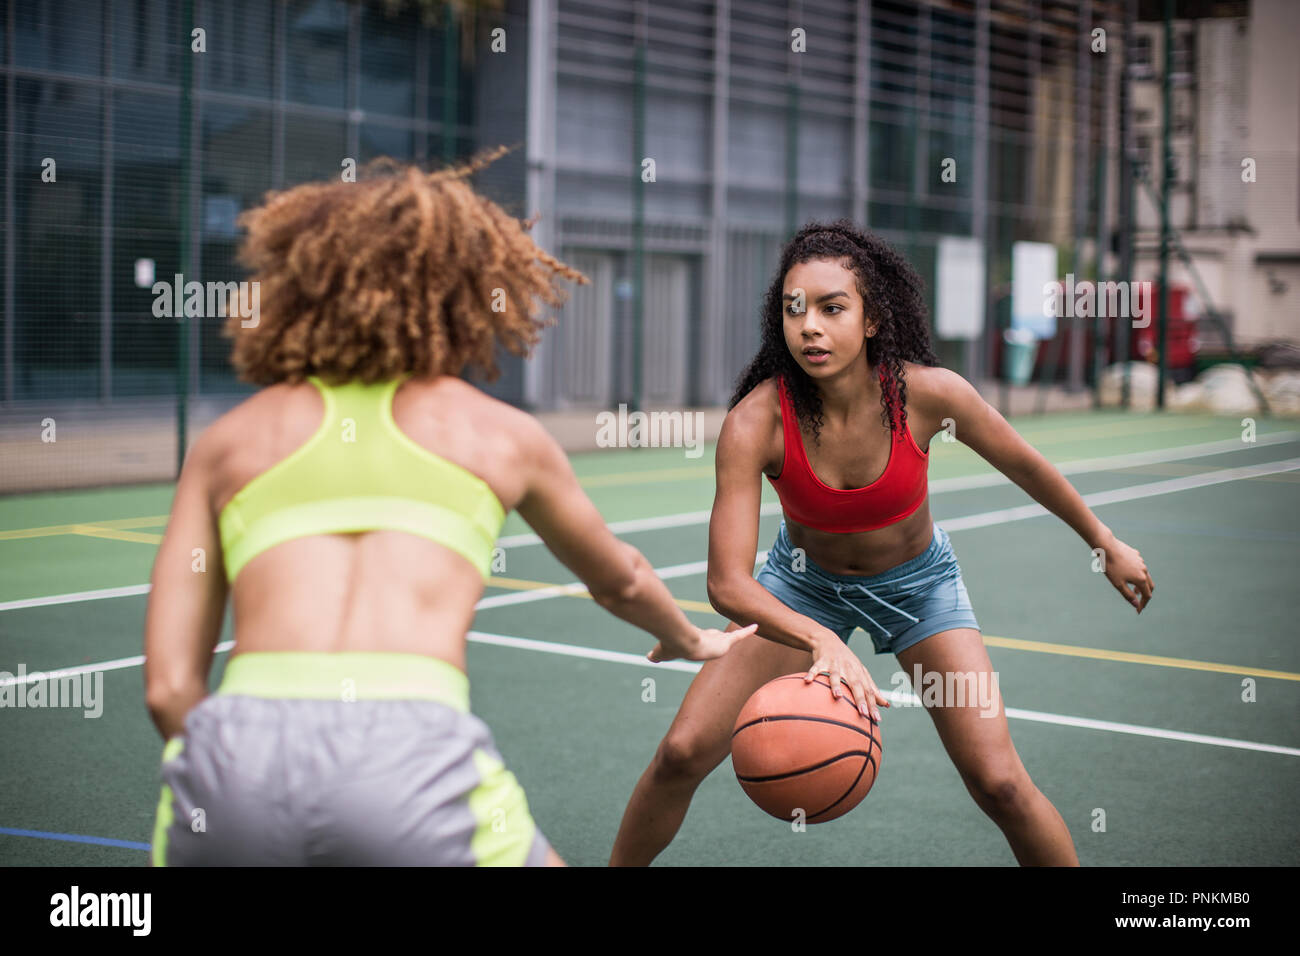 Young adult females playing basketball Stock Photo